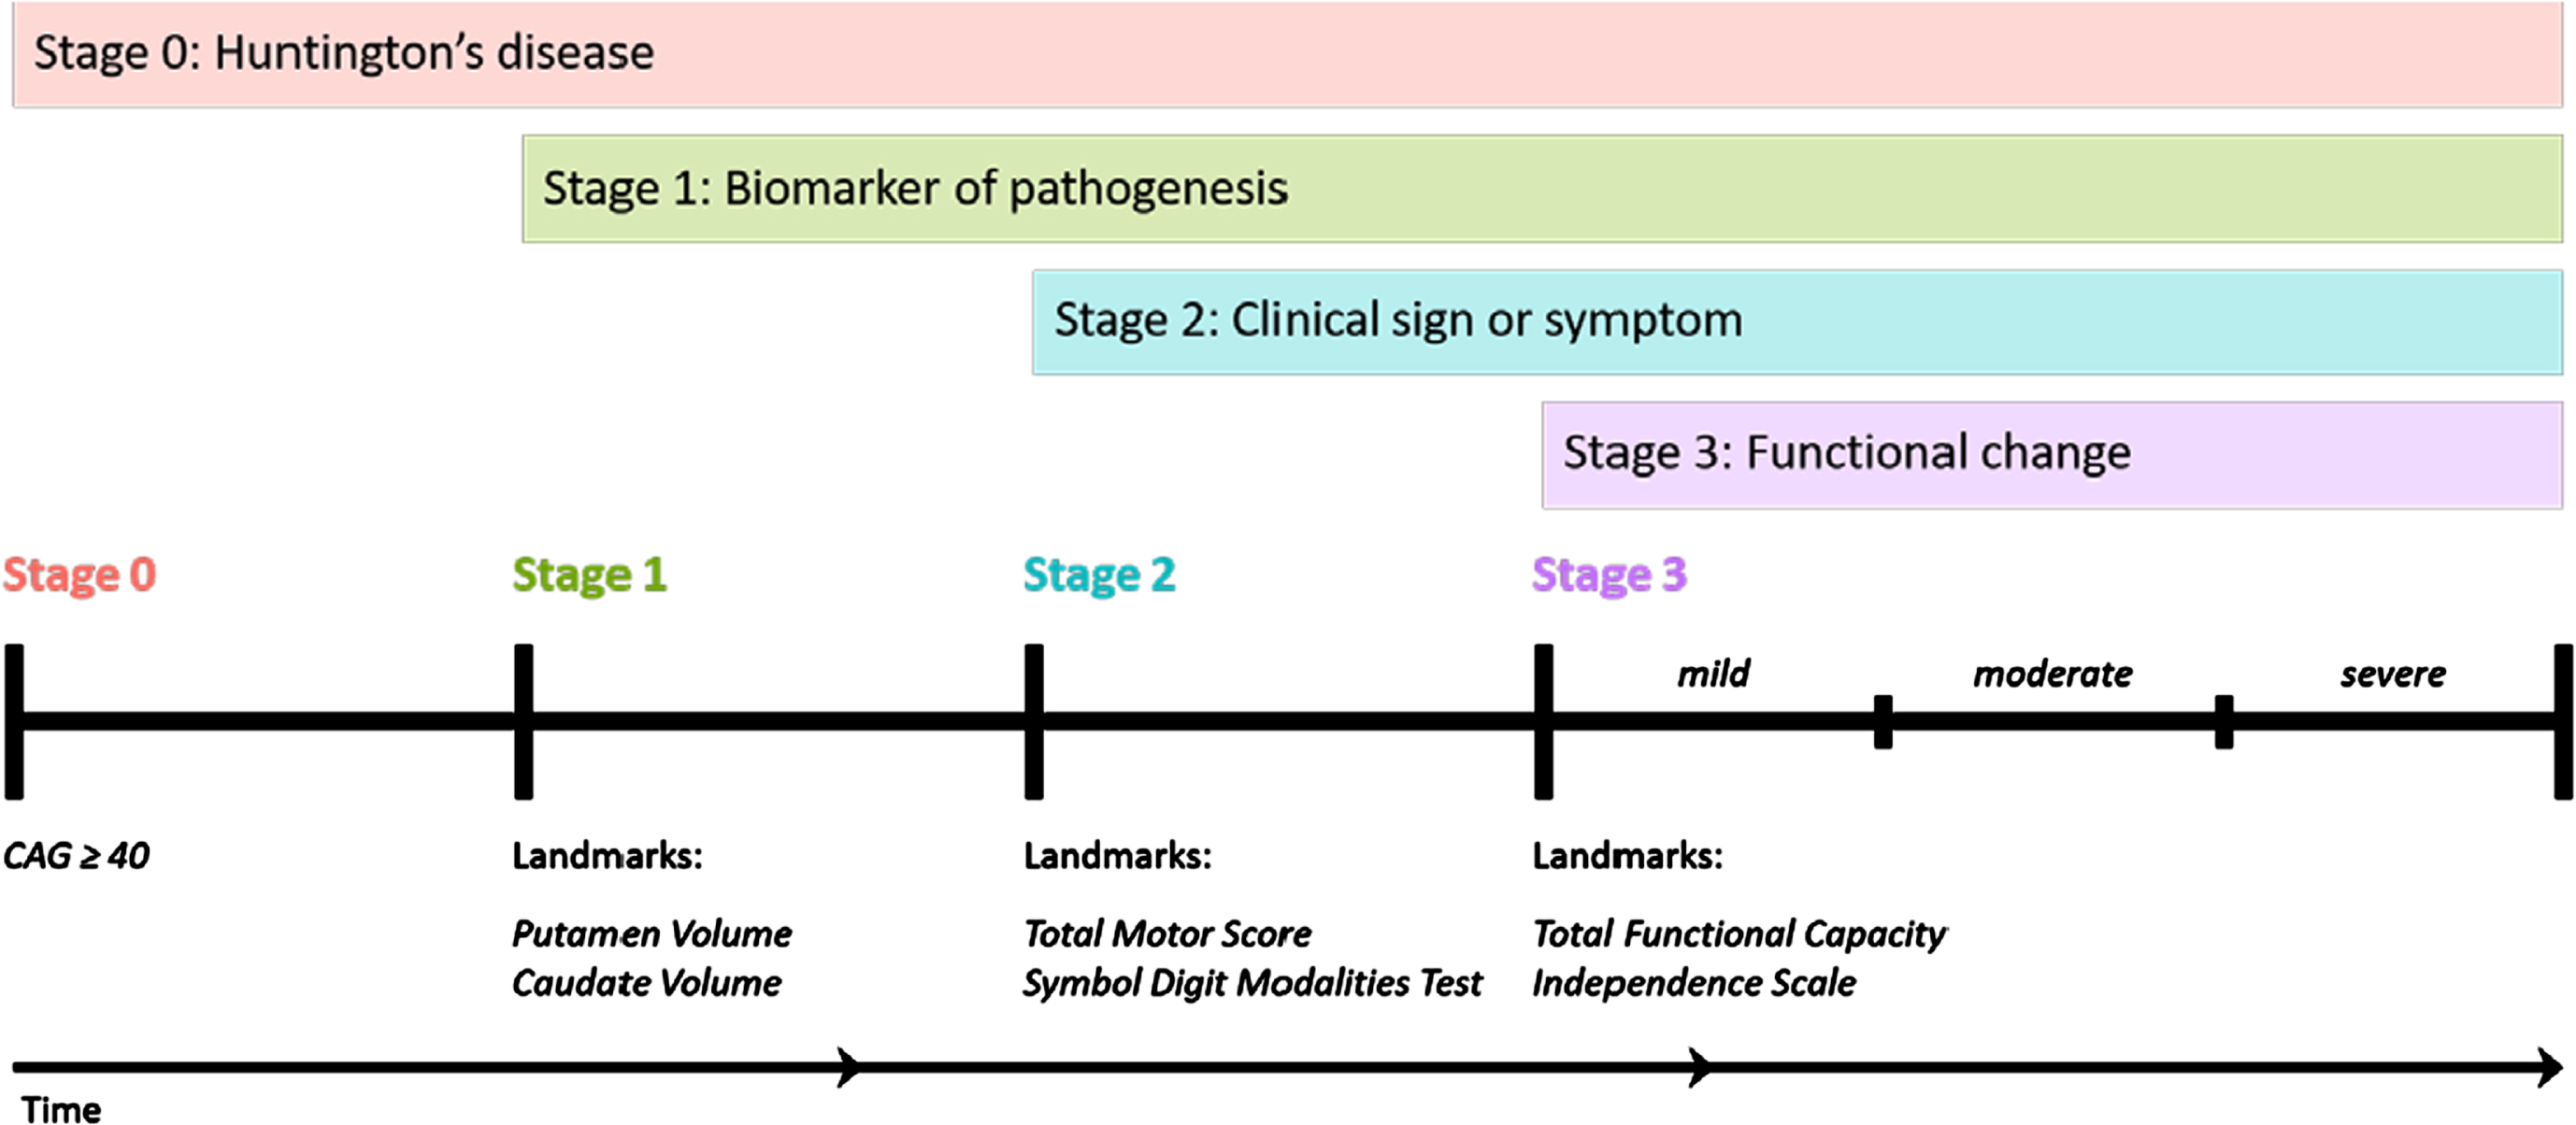 The HD-Integrated Staging System (HD-ISS): Cumulative staging framework and landmarks. Graphical representation of the temporal sequence of Stage progression and the associated landmark assessments that define Stage entry. (Note: time not to scale). From accompanying editorial: “Refining the Language of Huntington’s Disease Progression with the Huntington disease integrated staging system (HD-ISS)”.